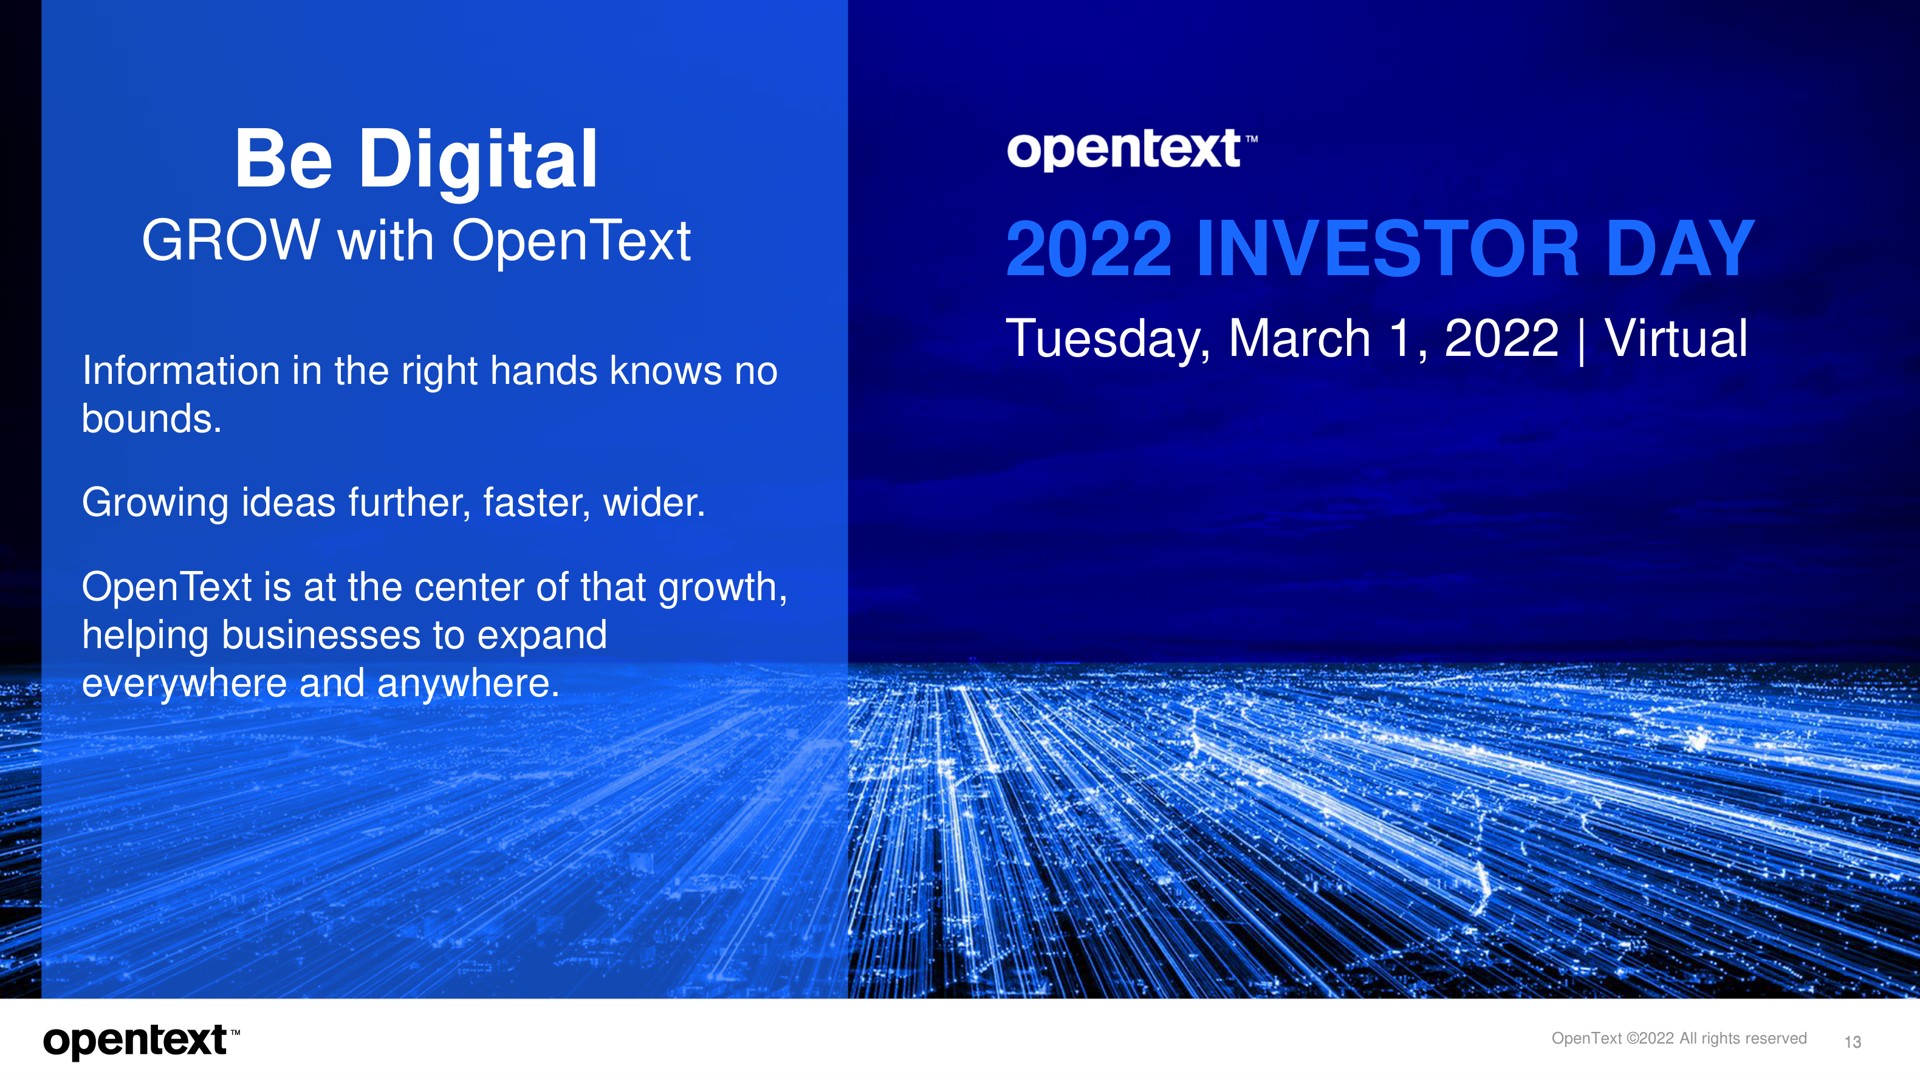 be digital grow with information in the right hands knows no bounds growing ideas further faster is at the center of that growth helping businesses to expand everywhere and anywhere investor day march virtual eye | OpenText